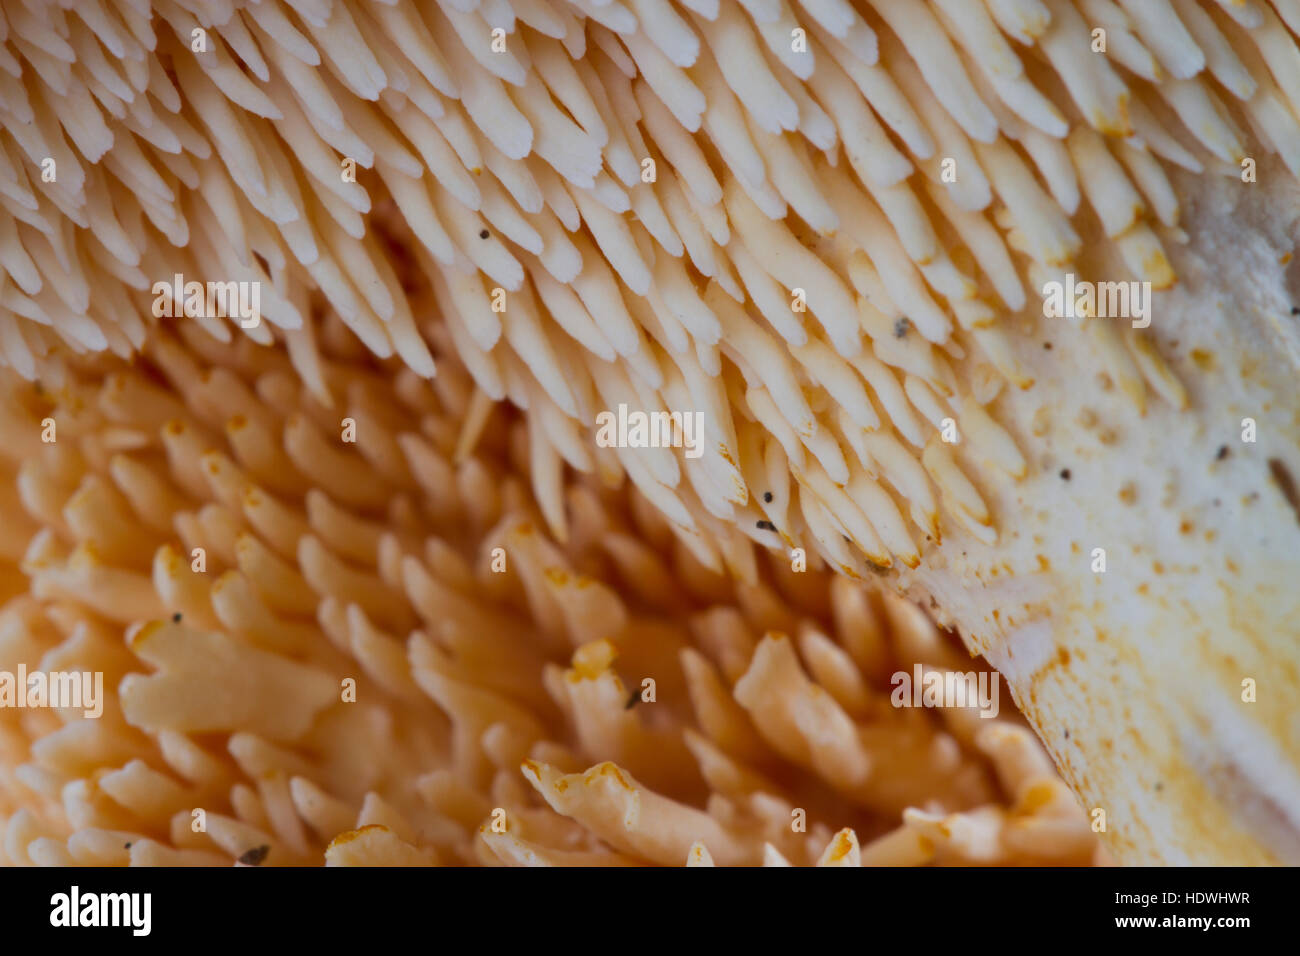 Close-up of the spore-producing spines of a Hedgehog Fungus (Hydnum repandum) fruiting body. Powys, Wales. October. Stock Photo